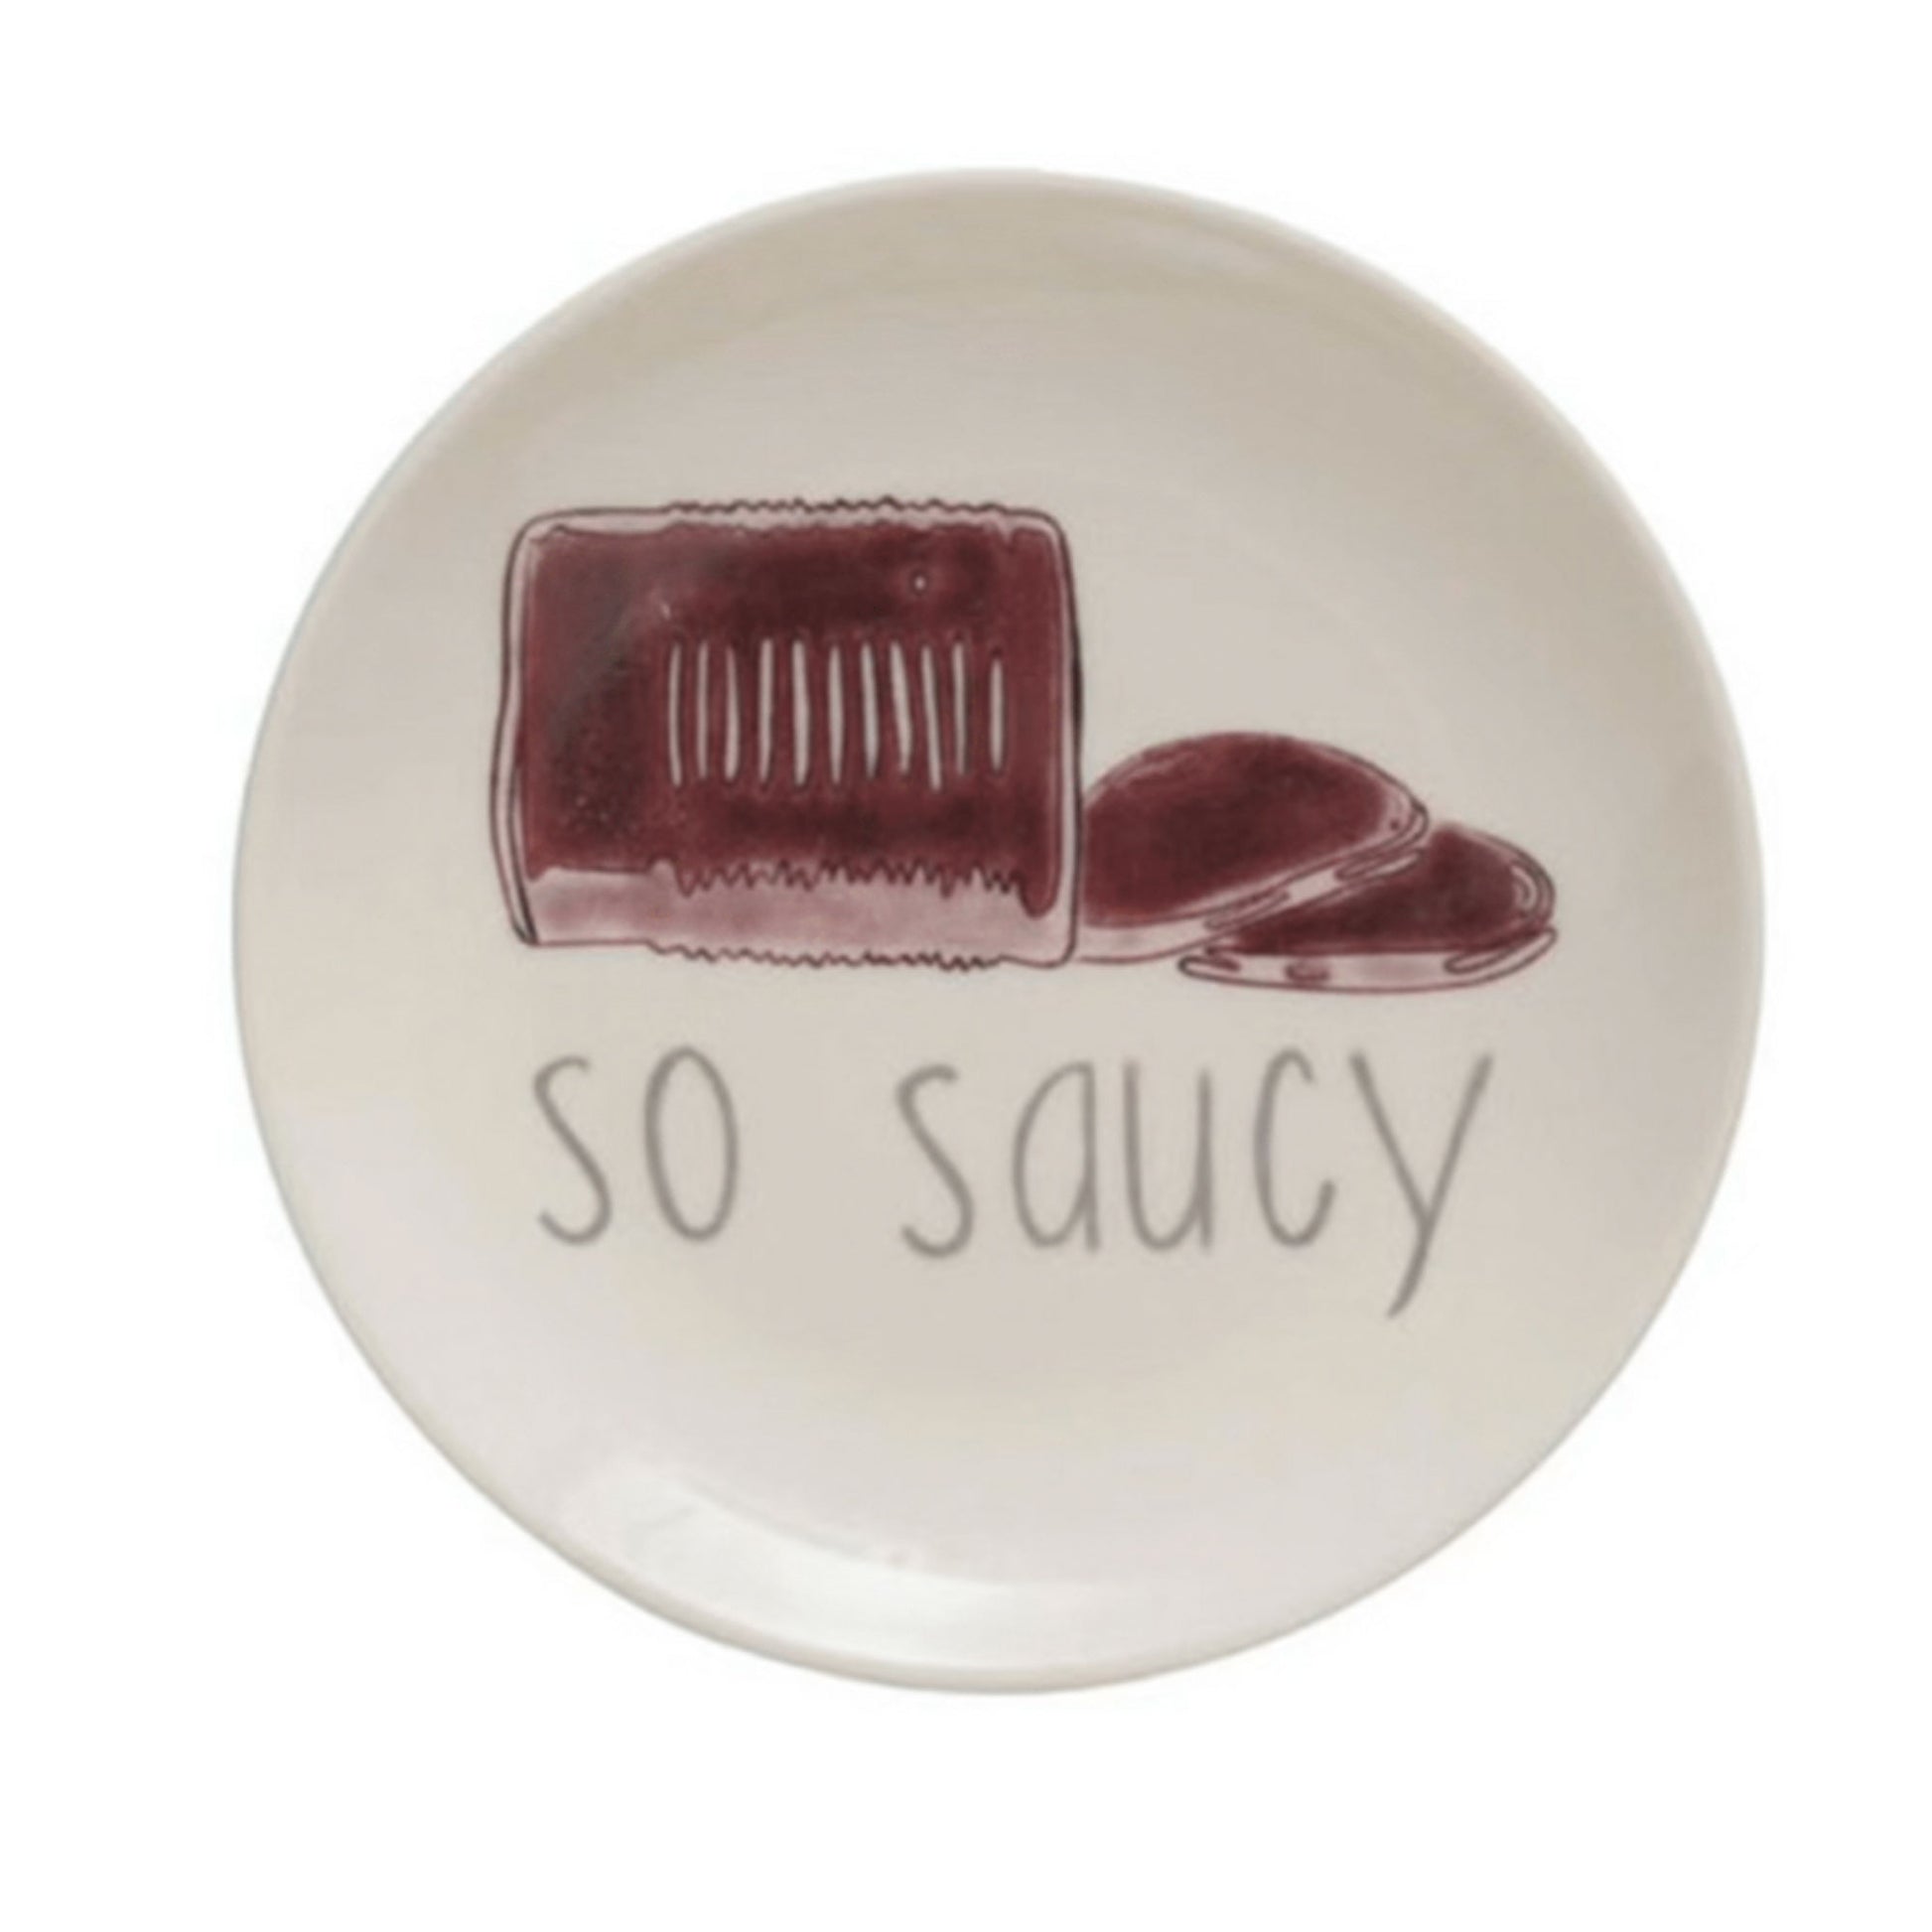 Creative Co-op Stoneware Plate with Thanksgiving Phrases - 5" - So Saucy